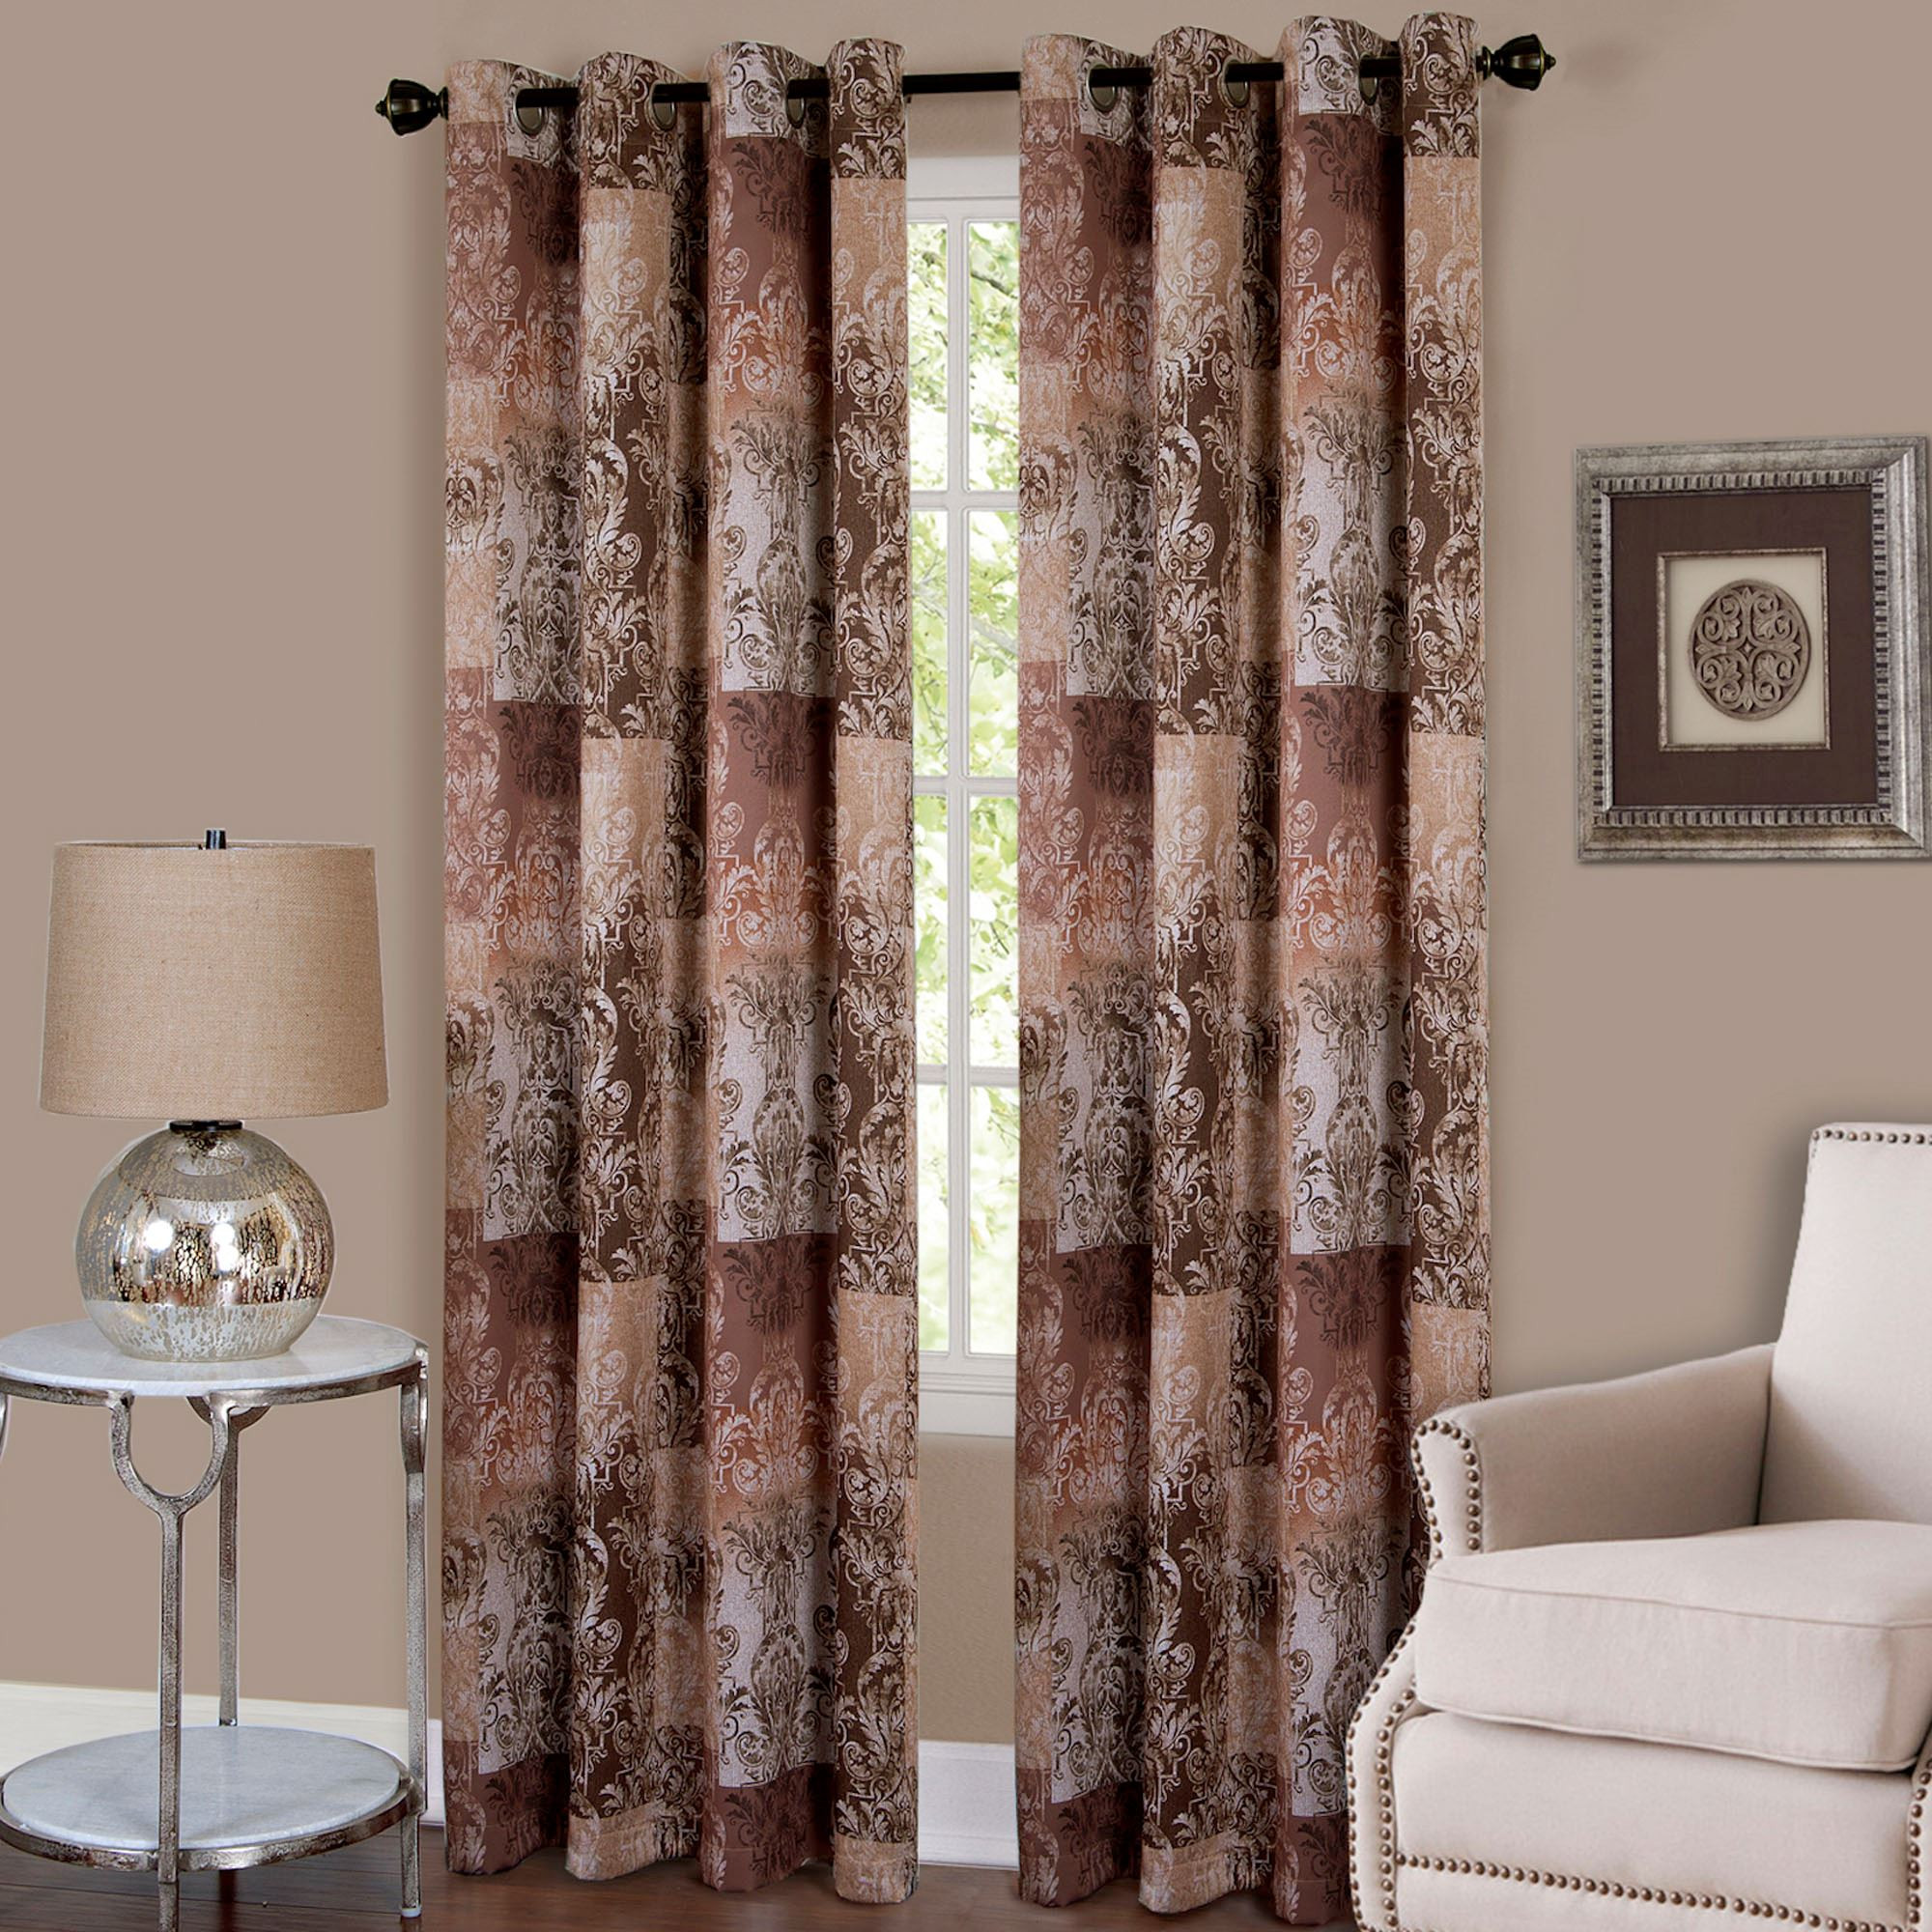 Sears Curtains For Living Room
 Curtain Give Your Space A Relaxing And Tranquil Look With